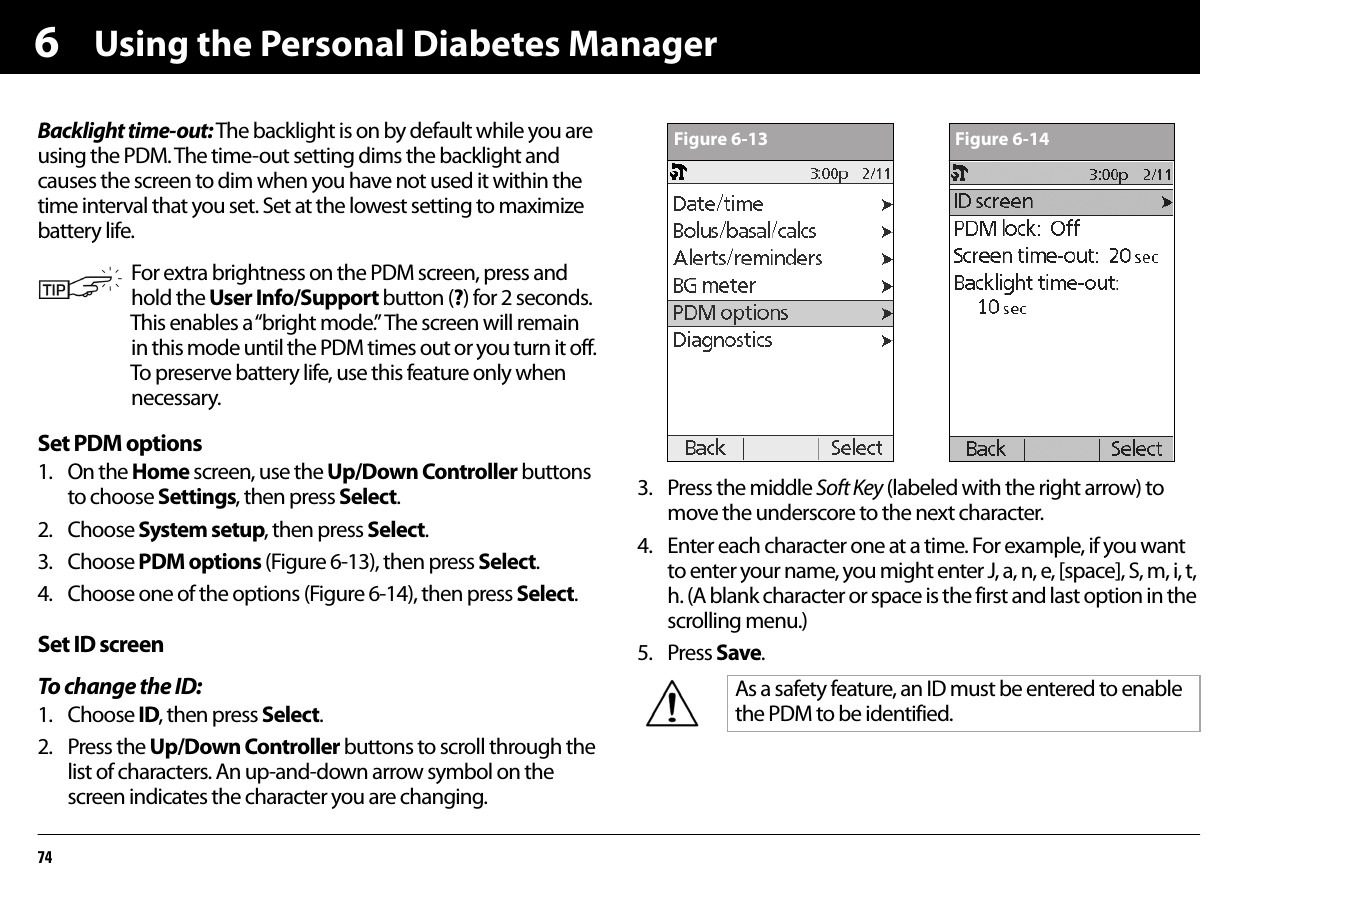 Using the Personal Diabetes Manager746Backlight time-out: The backlight is on by default while you are using the PDM. The time-out setting dims the backlight and causes the screen to dim when you have not used it within the time interval that you set. Set at the lowest setting to maximize battery life.Set PDM options1. On the Home screen, use the Up/Down Controller buttons to choose Settings, then press Select.2. Choose System setup, then press Select.3. Choose PDM options (Figure 6-13), then press Select.4. Choose one of the options (Figure 6-14), then press Select.Set ID screenTo change the ID:1. Choose ID, then press Select.2. Press the Up/Down Controller buttons to scroll through the list of characters. An up-and-down arrow symbol on the screen indicates the character you are changing.3. Press the middle Soft Key (labeled with the right arrow) to move the underscore to the next character. 4. Enter each character one at a time. For example, if you want to enter your name, you might enter J, a, n, e, [space], S, m, i, t, h. (A blank character or space is the first and last option in the scrolling menu.)5. Press Save.For extra brightness on the PDM screen, press and hold the User Info/Support button (?) for 2 seconds. This enables a “bright mode.” The screen will remain in this mode until the PDM times out or you turn it off. To preserve battery life, use this feature only when necessary.As a safety feature, an ID must be entered to enable the PDM to be identified.Figure 6-13 Figure 6-14